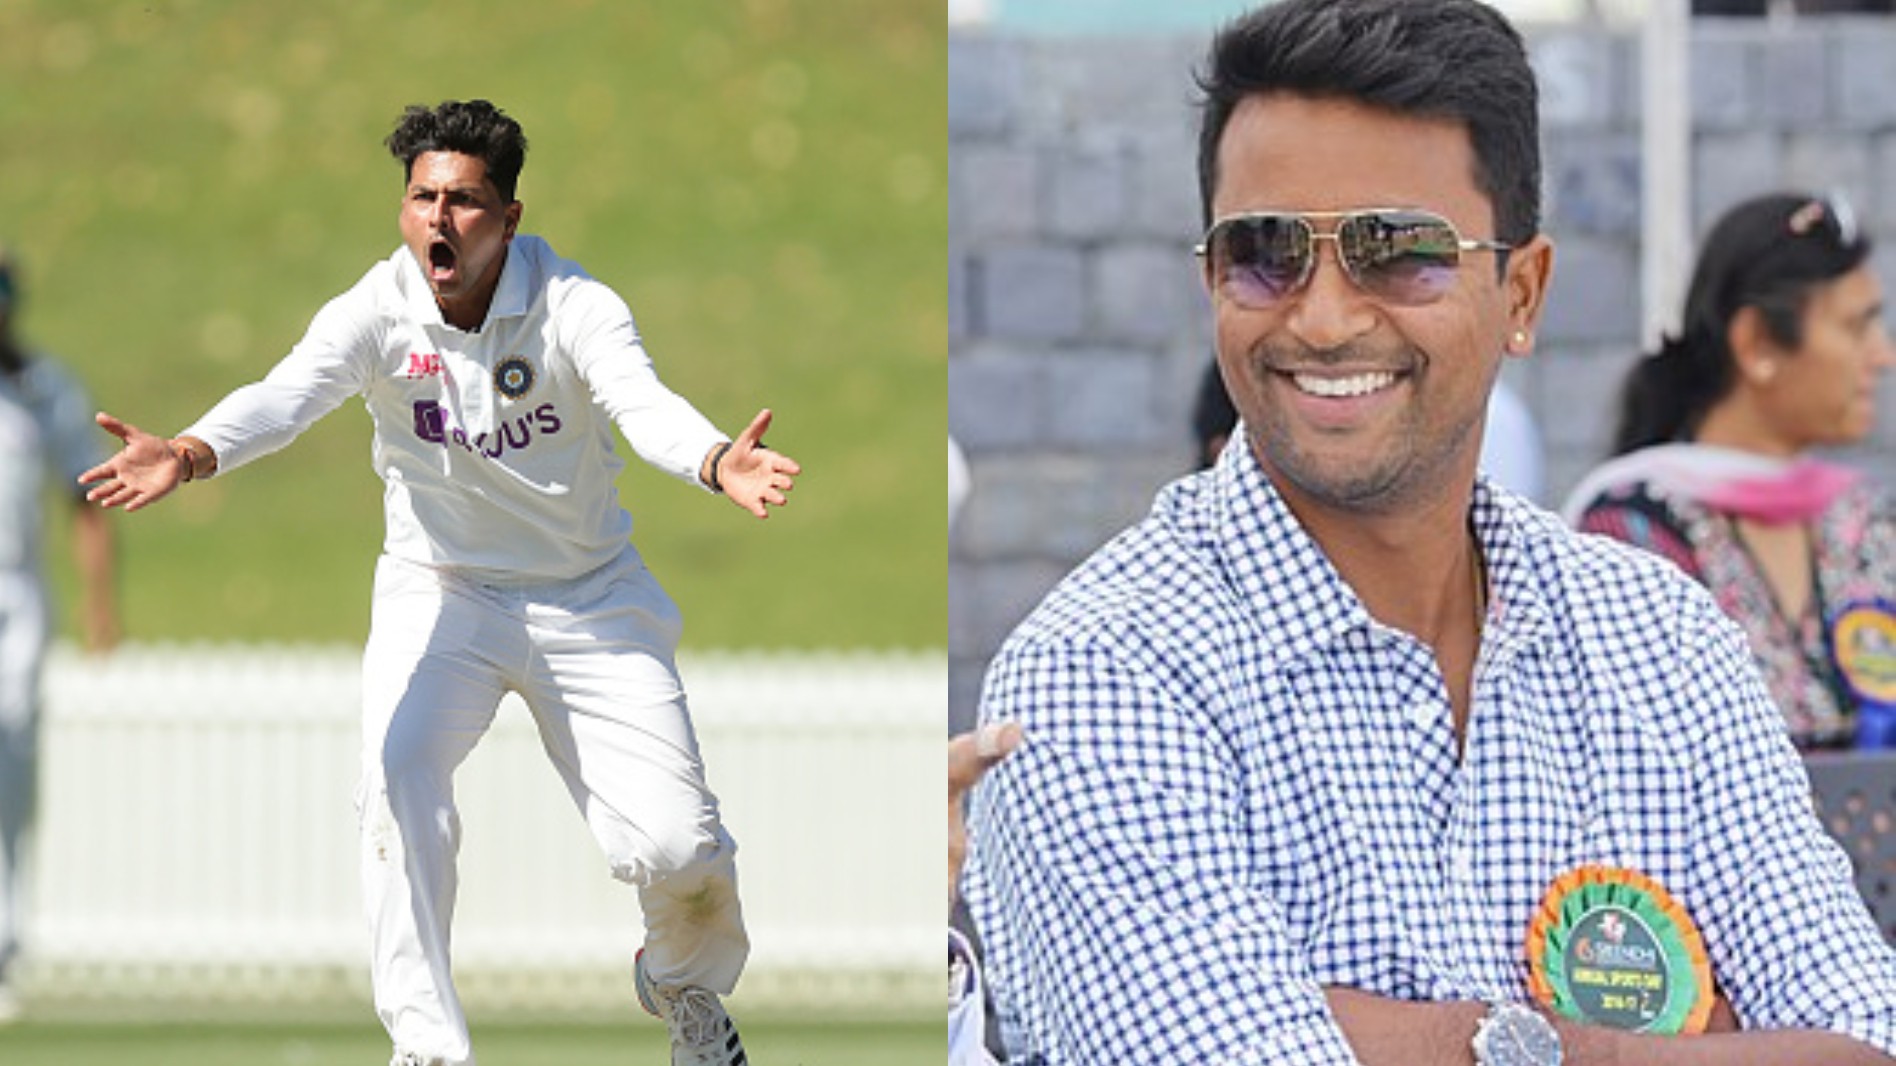 AUS v IND 2020-21: Kuldeep Yadav can be the possible ‘X-Factor’ in pink-ball Test, says Pragyan Ojha